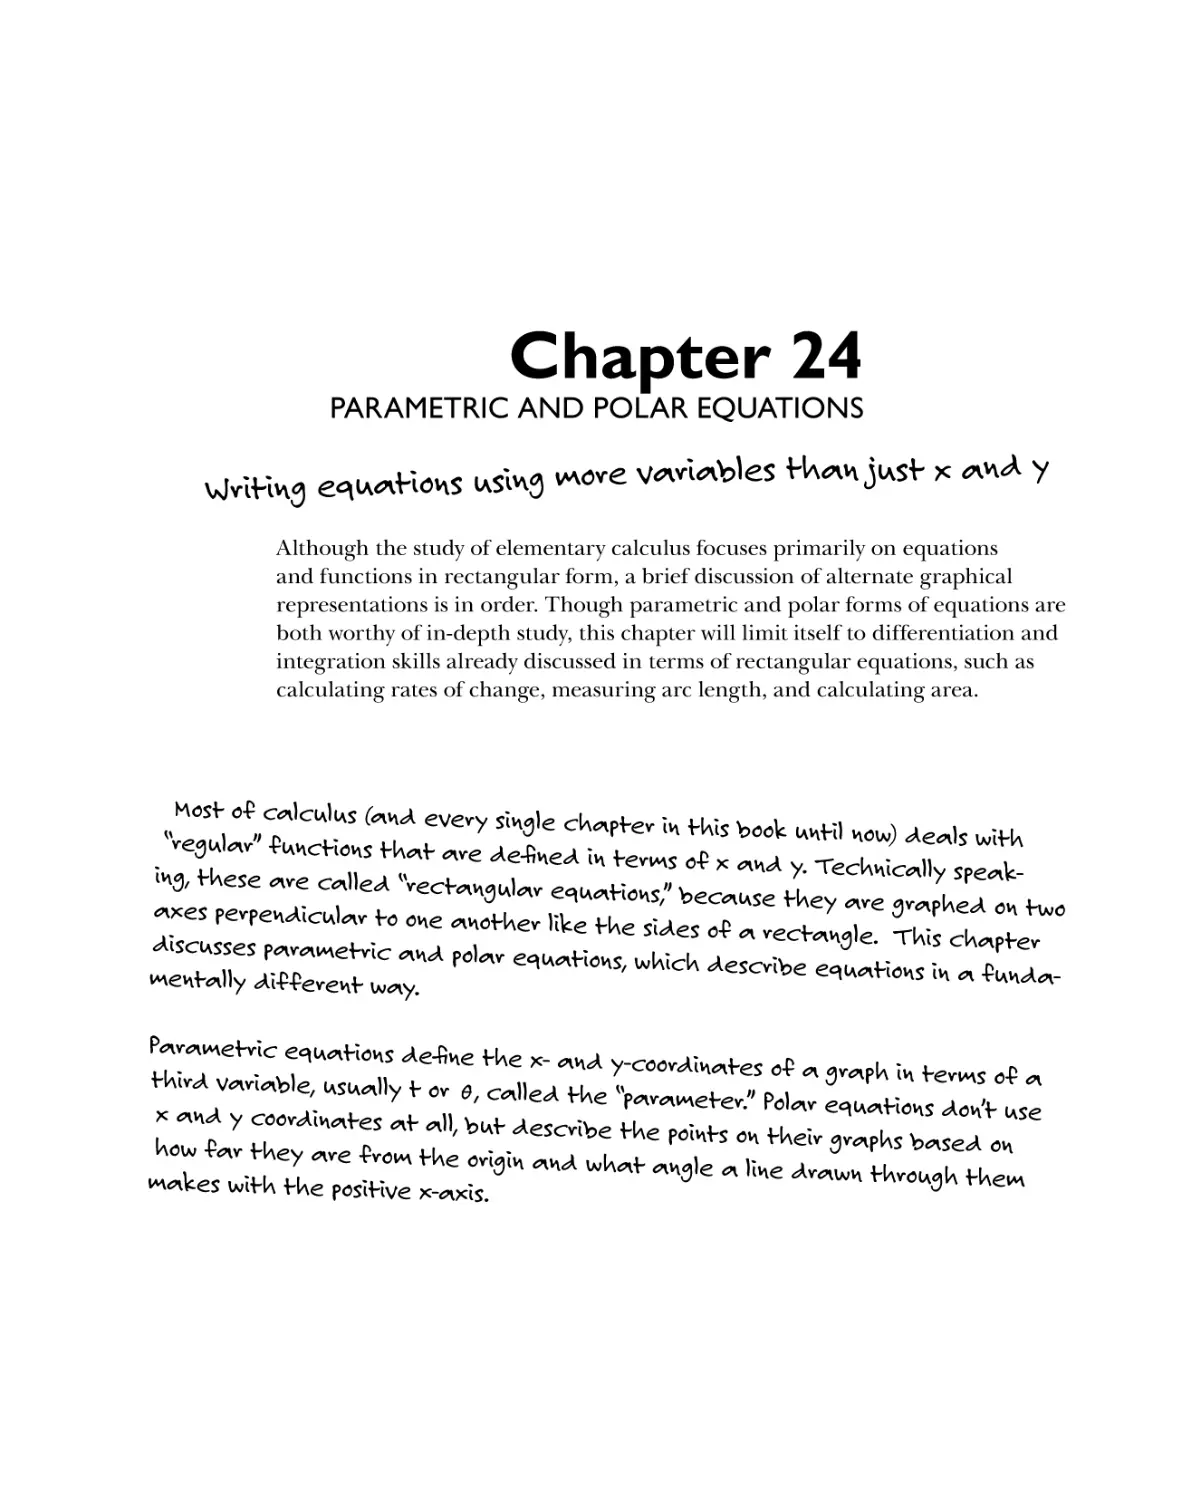 Chapter 24: Parametric and Polar Equations 443